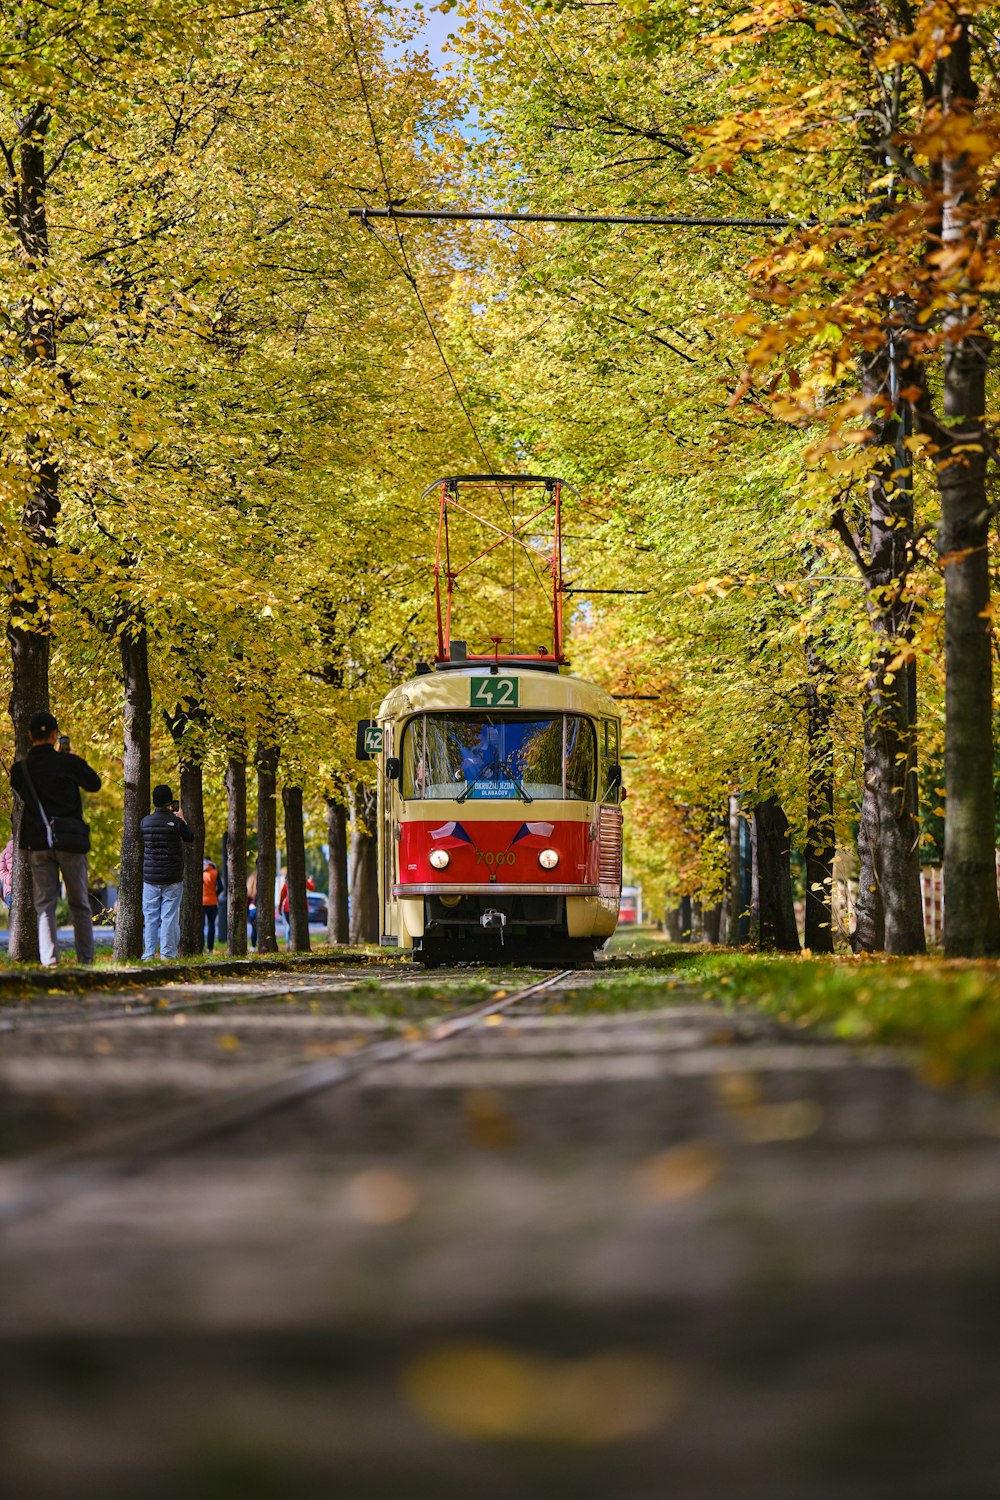 a red and white trolley car traveling down a tree lined street